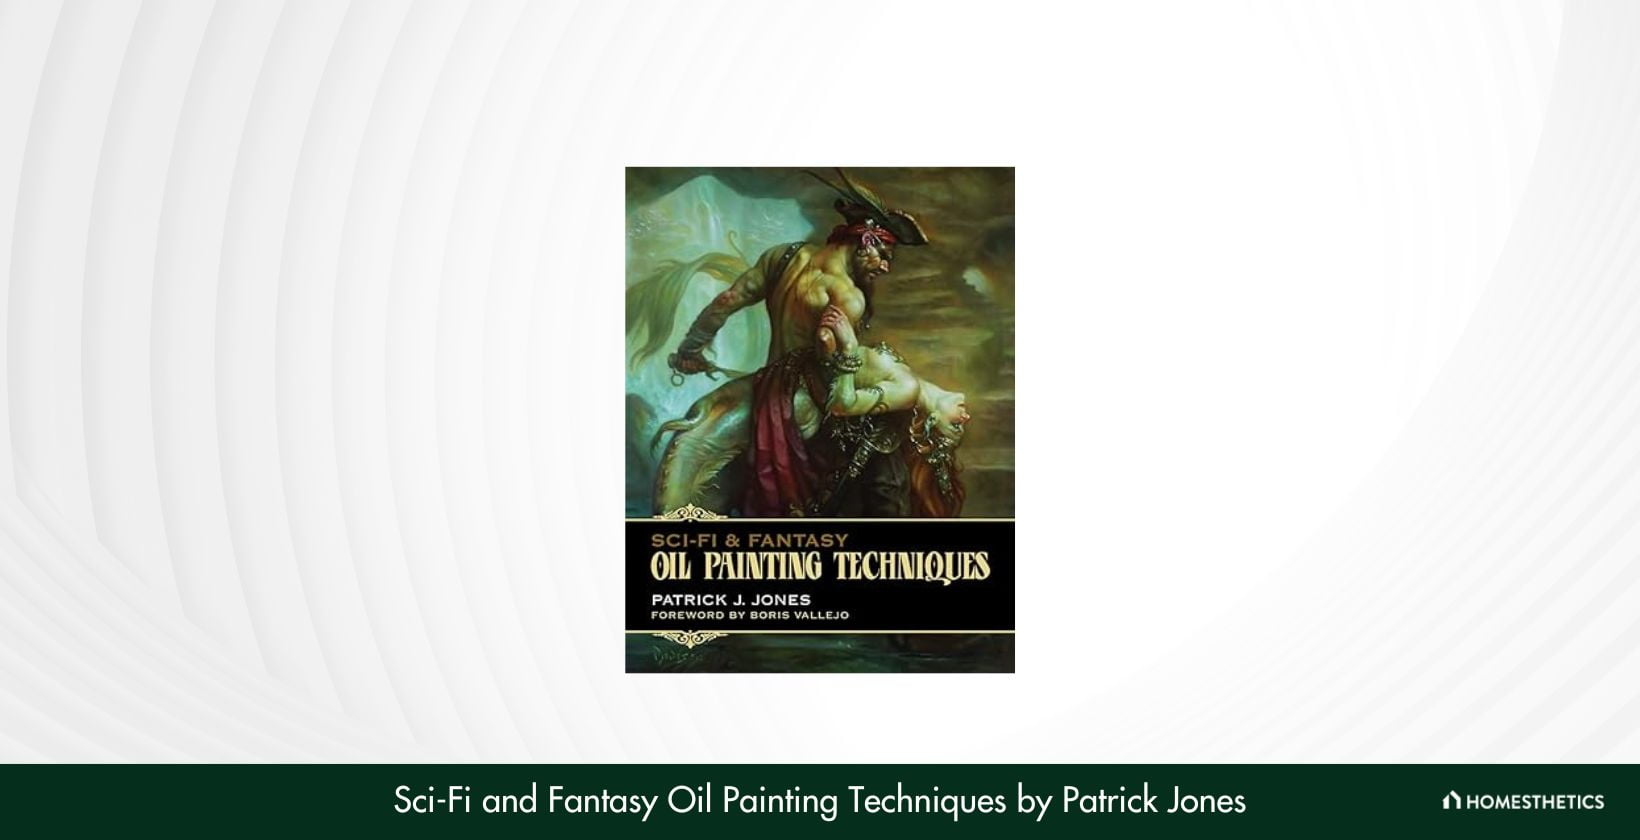 Sci Fi and Fantasy Oil Painting Techniques by Patrick Jones